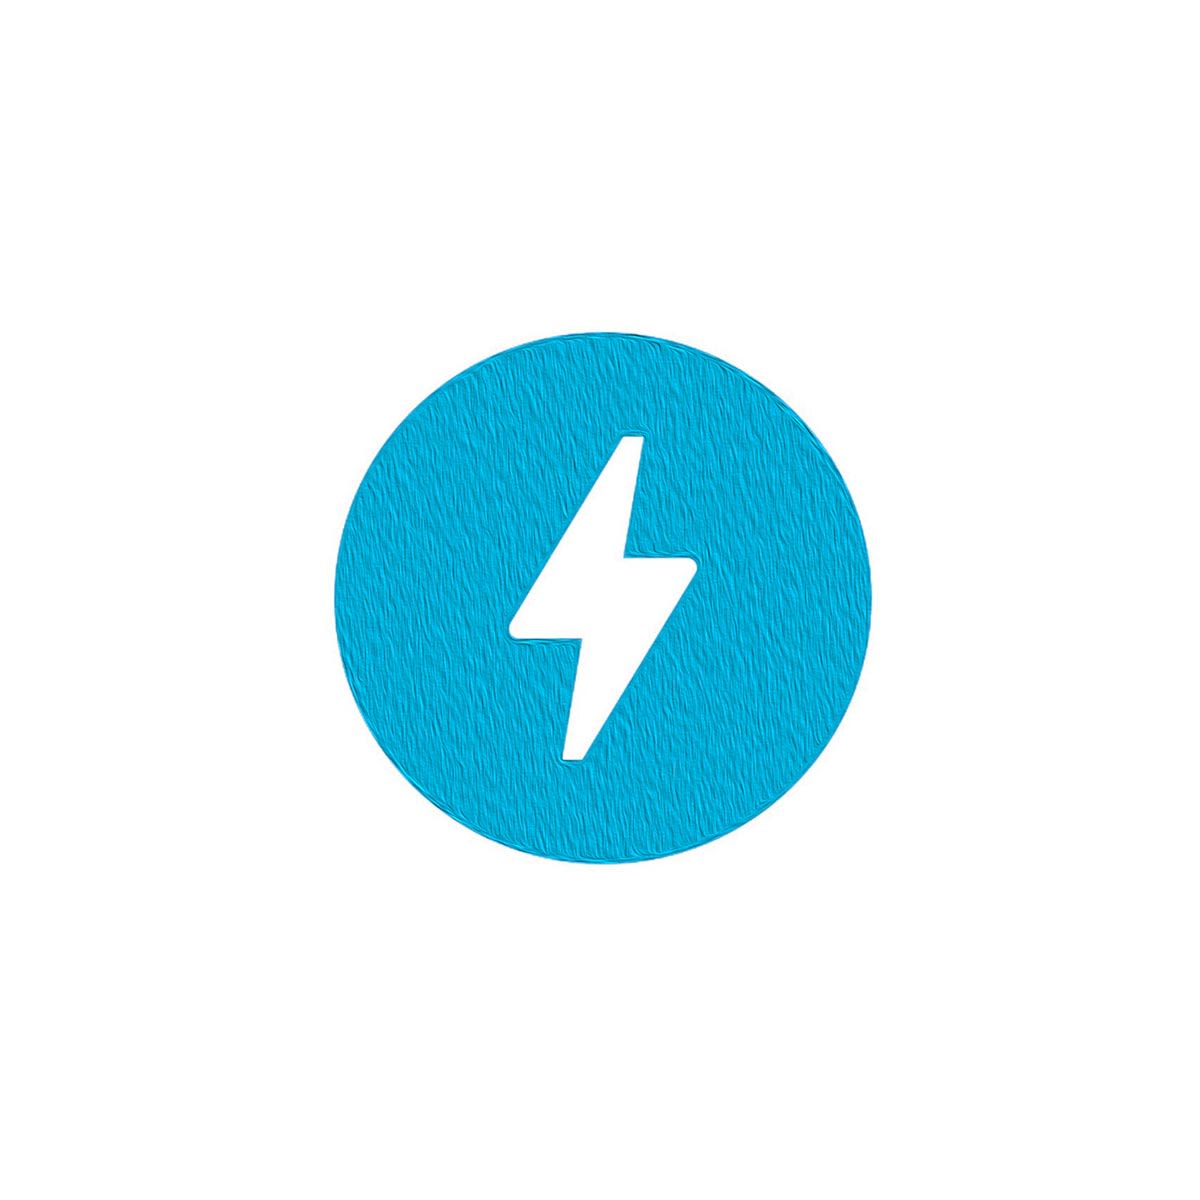 The AMP (Accelerated Mobile Pages) icon/logo